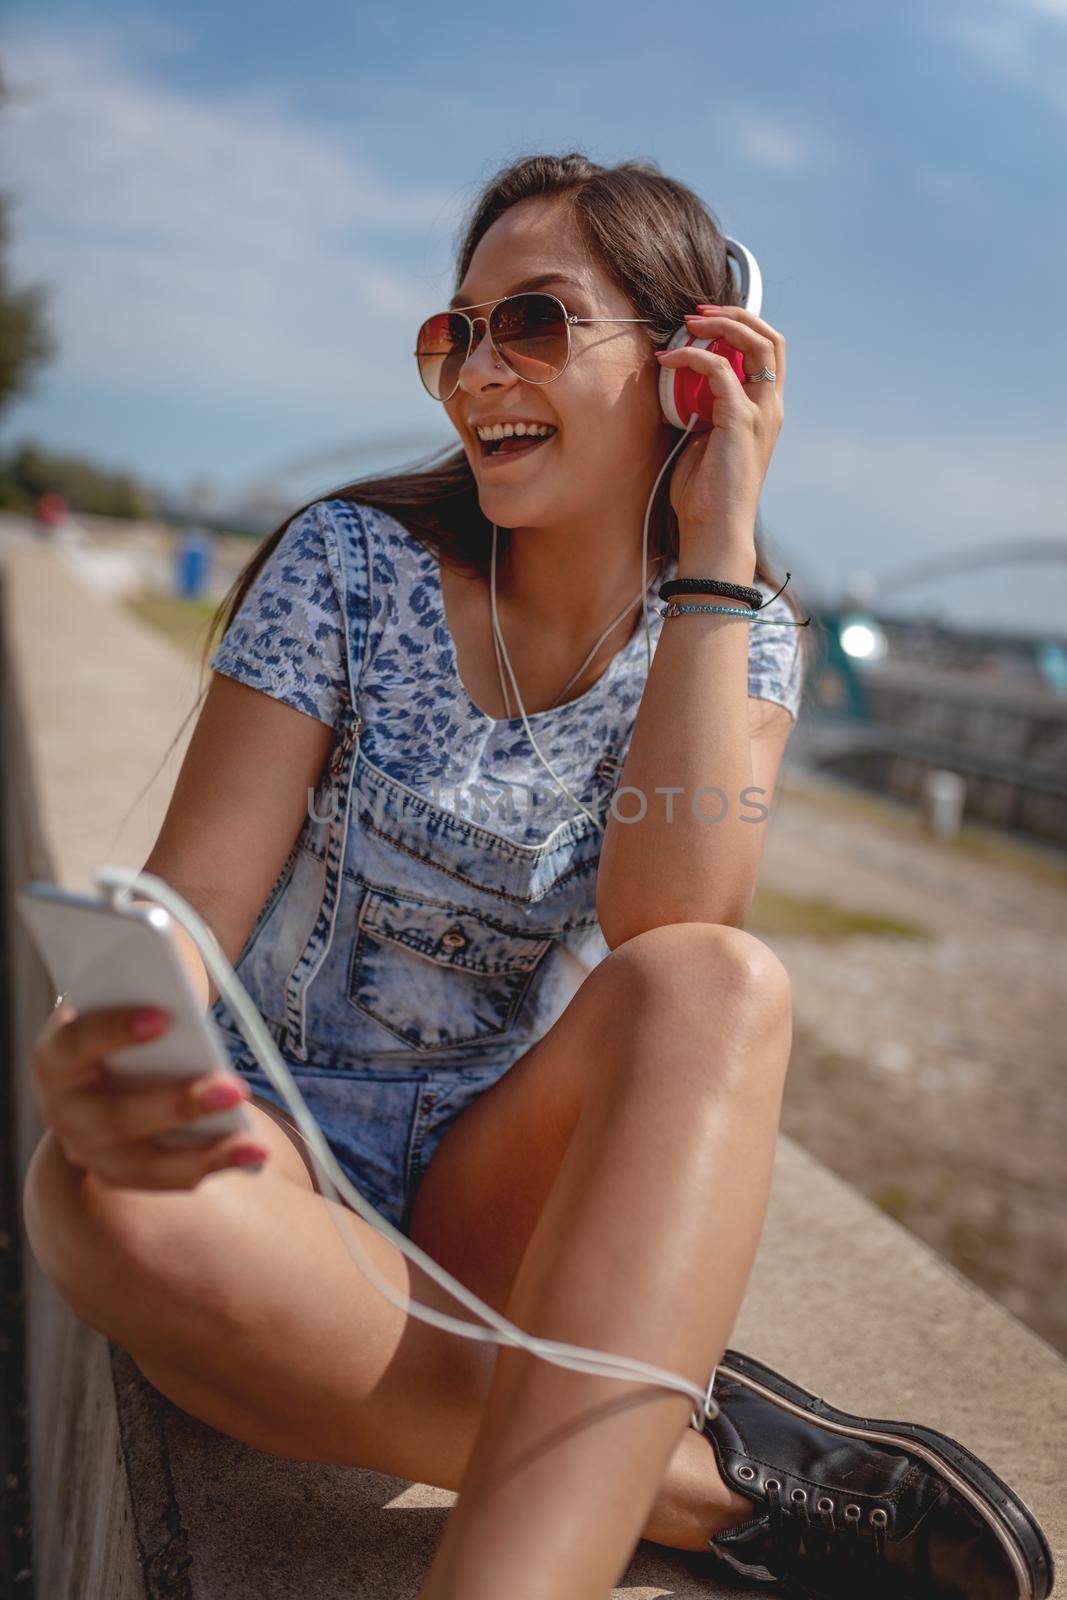 Music Makes Her Happy by MilanMarkovic78